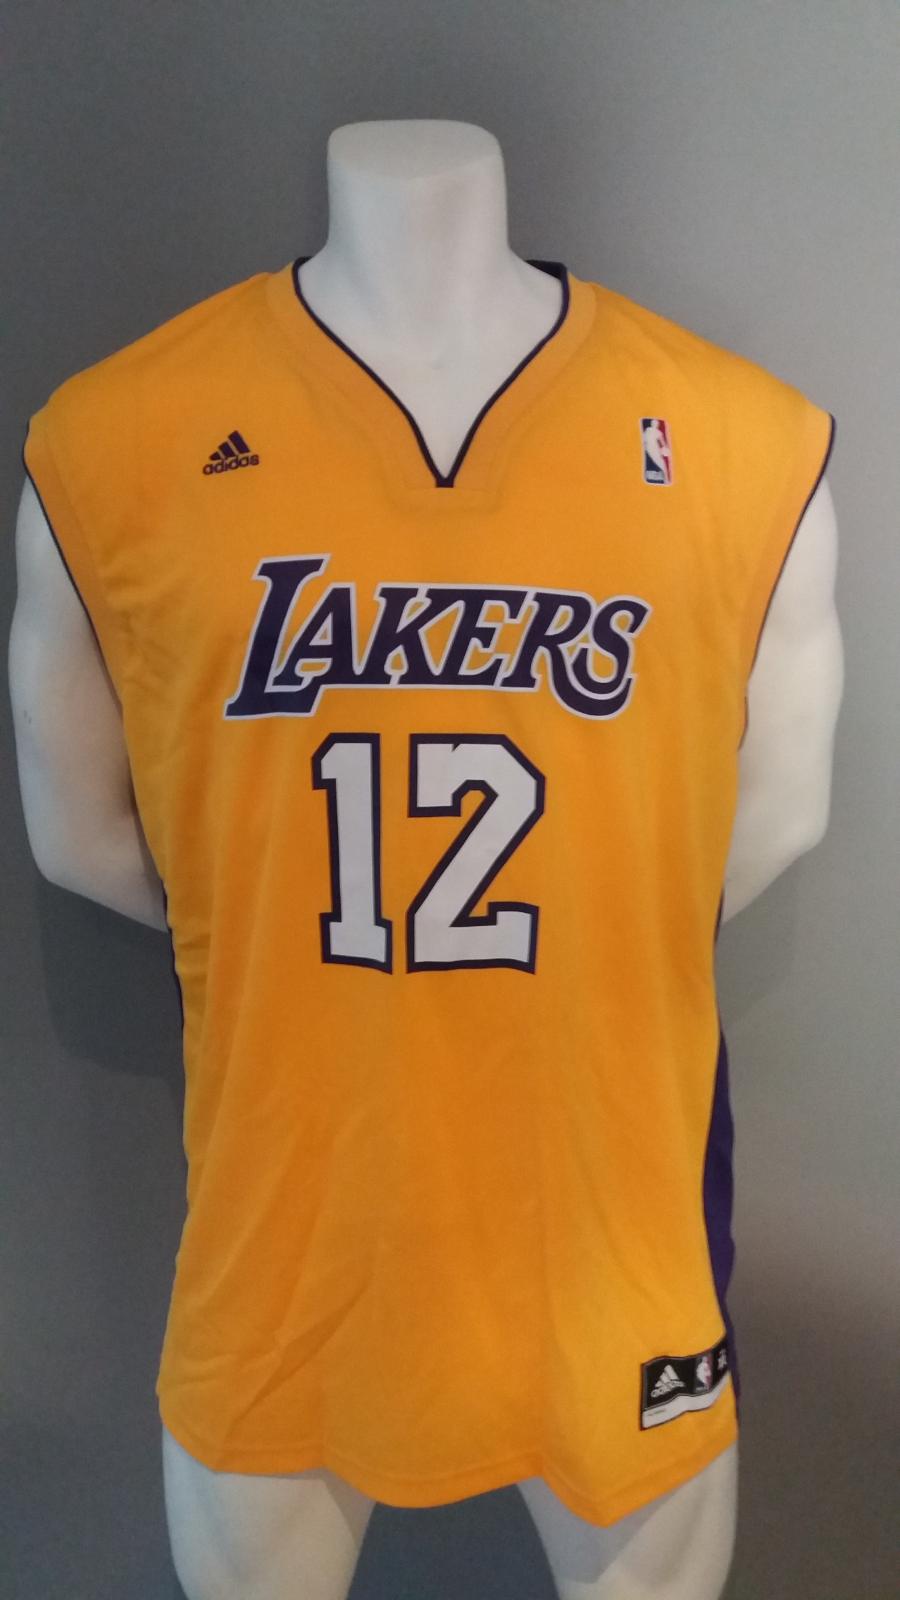 Jersey - Replica - Hombre - Dwight Howard - Los Angeles Lakers - Home - Adidas